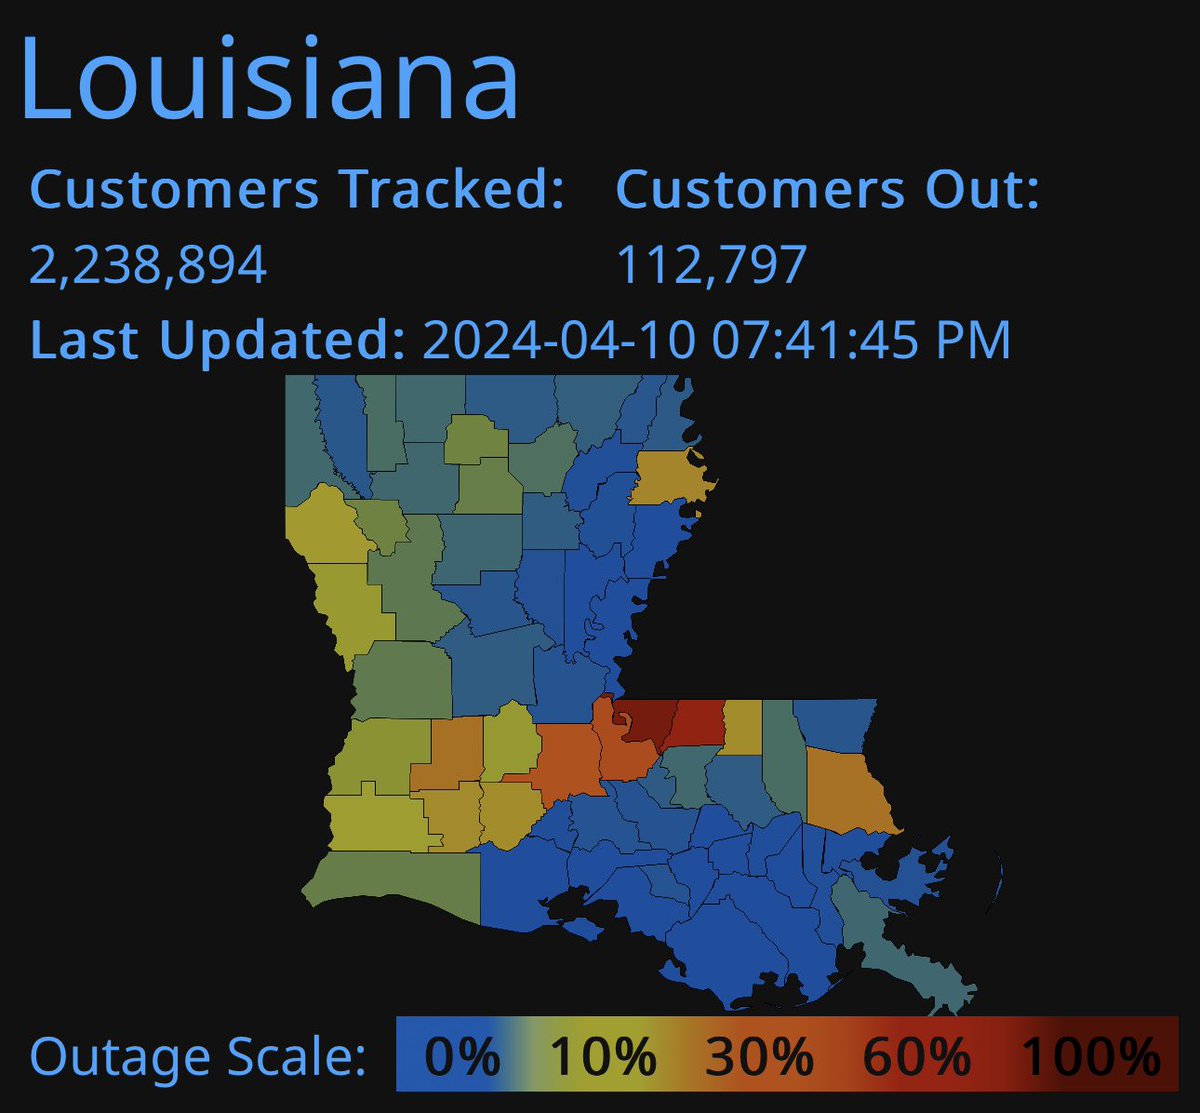 Over 100K remain without power tonight in Louisiana. Major outages stretch from Lake Charles to north of Baton Rouge where that intense squall line with hurricane force winds passed. Then in St. Tammany with the tornadoes. #lawx